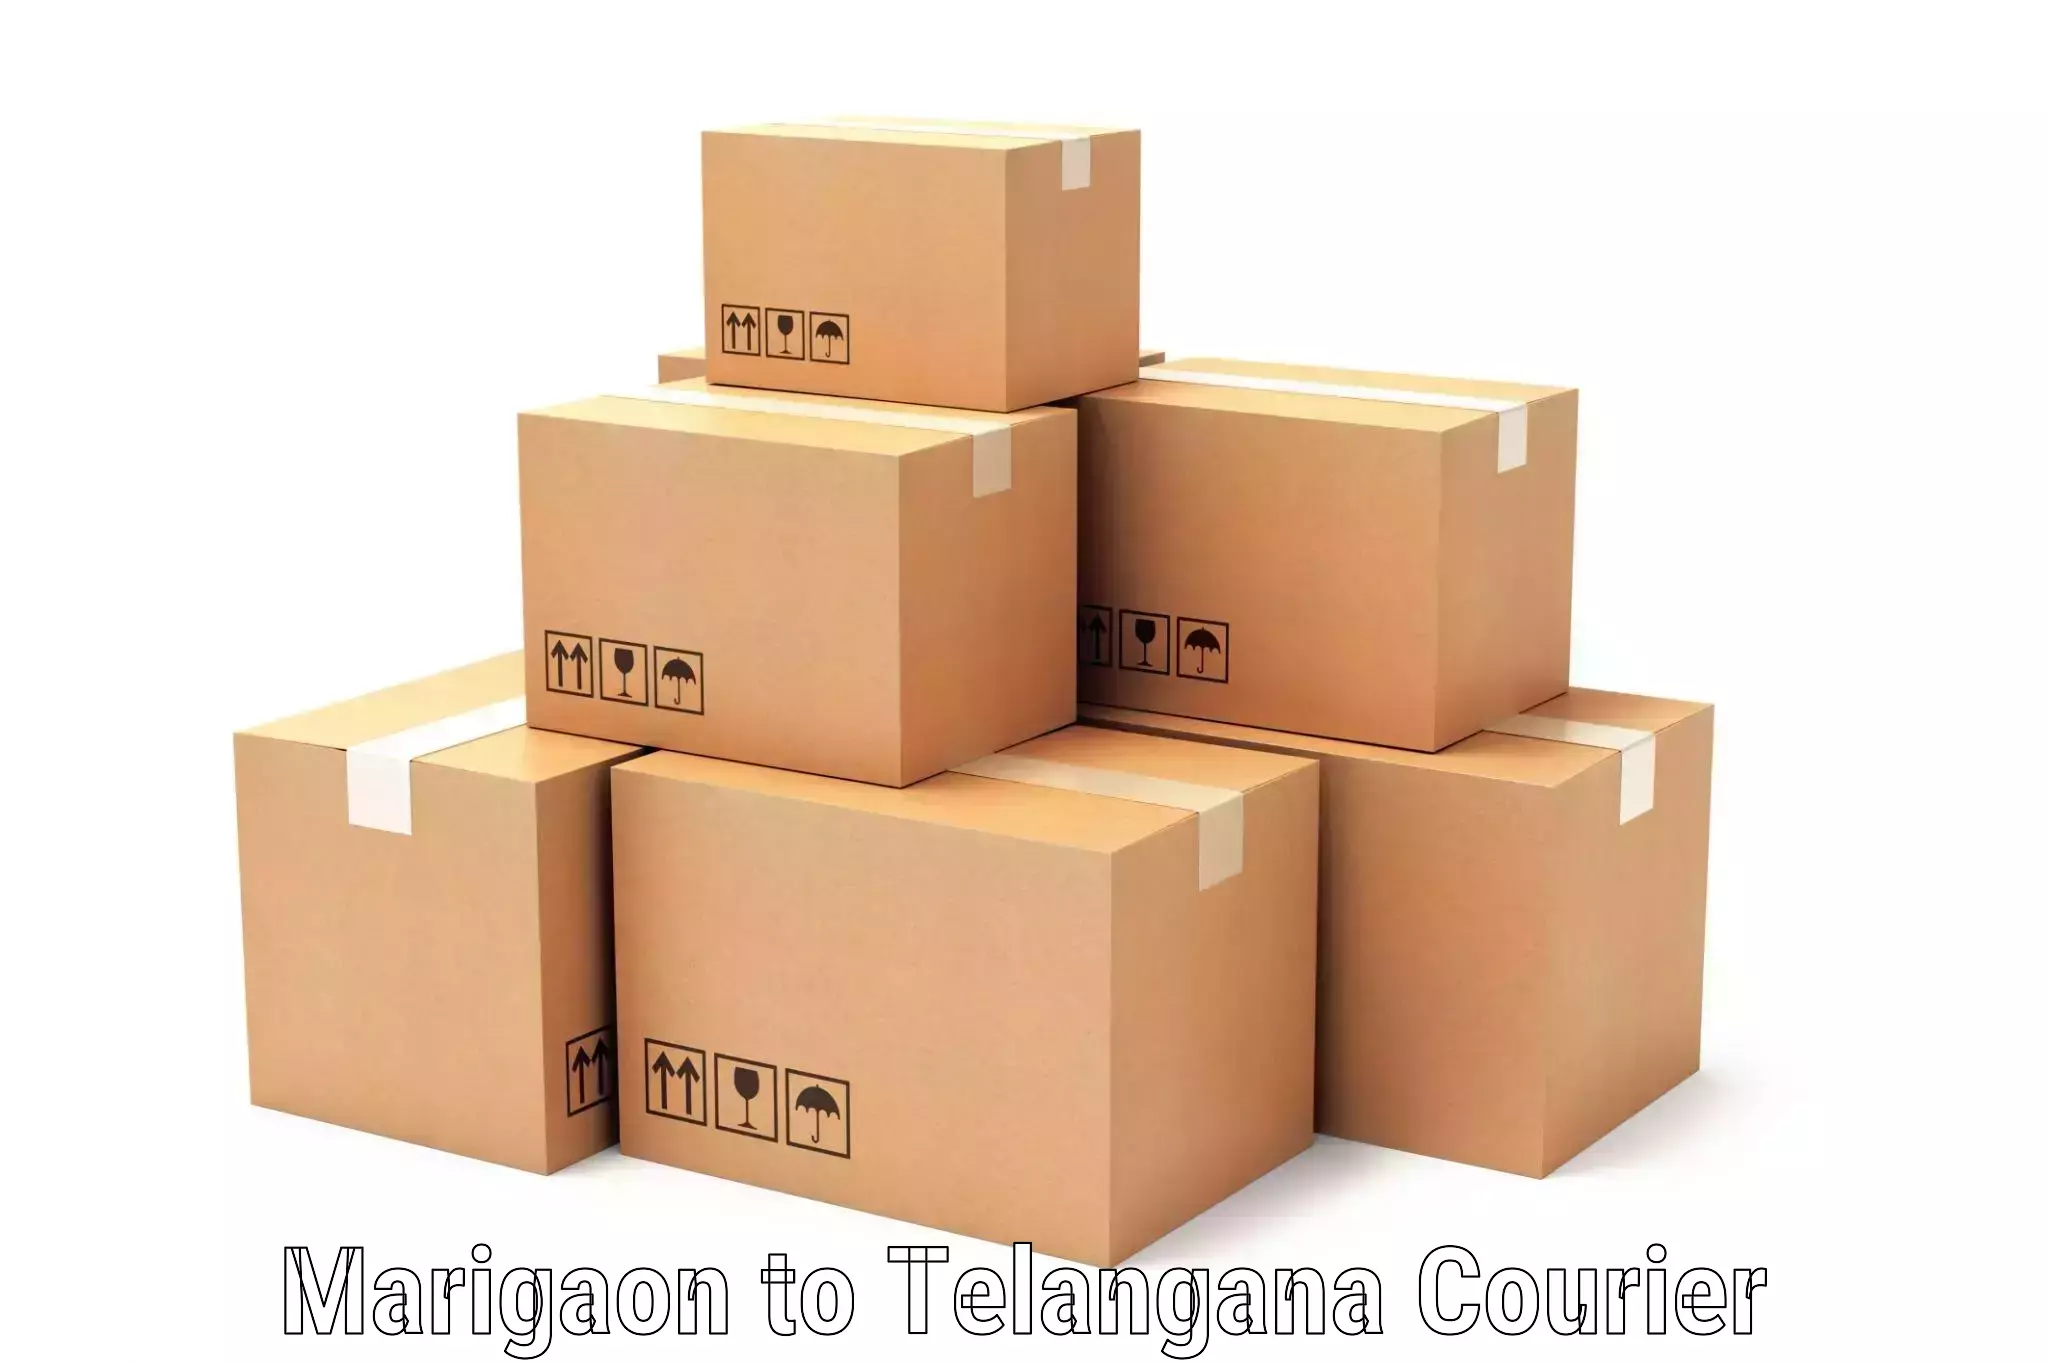 Comprehensive shipping network in Marigaon to Bhupalpally